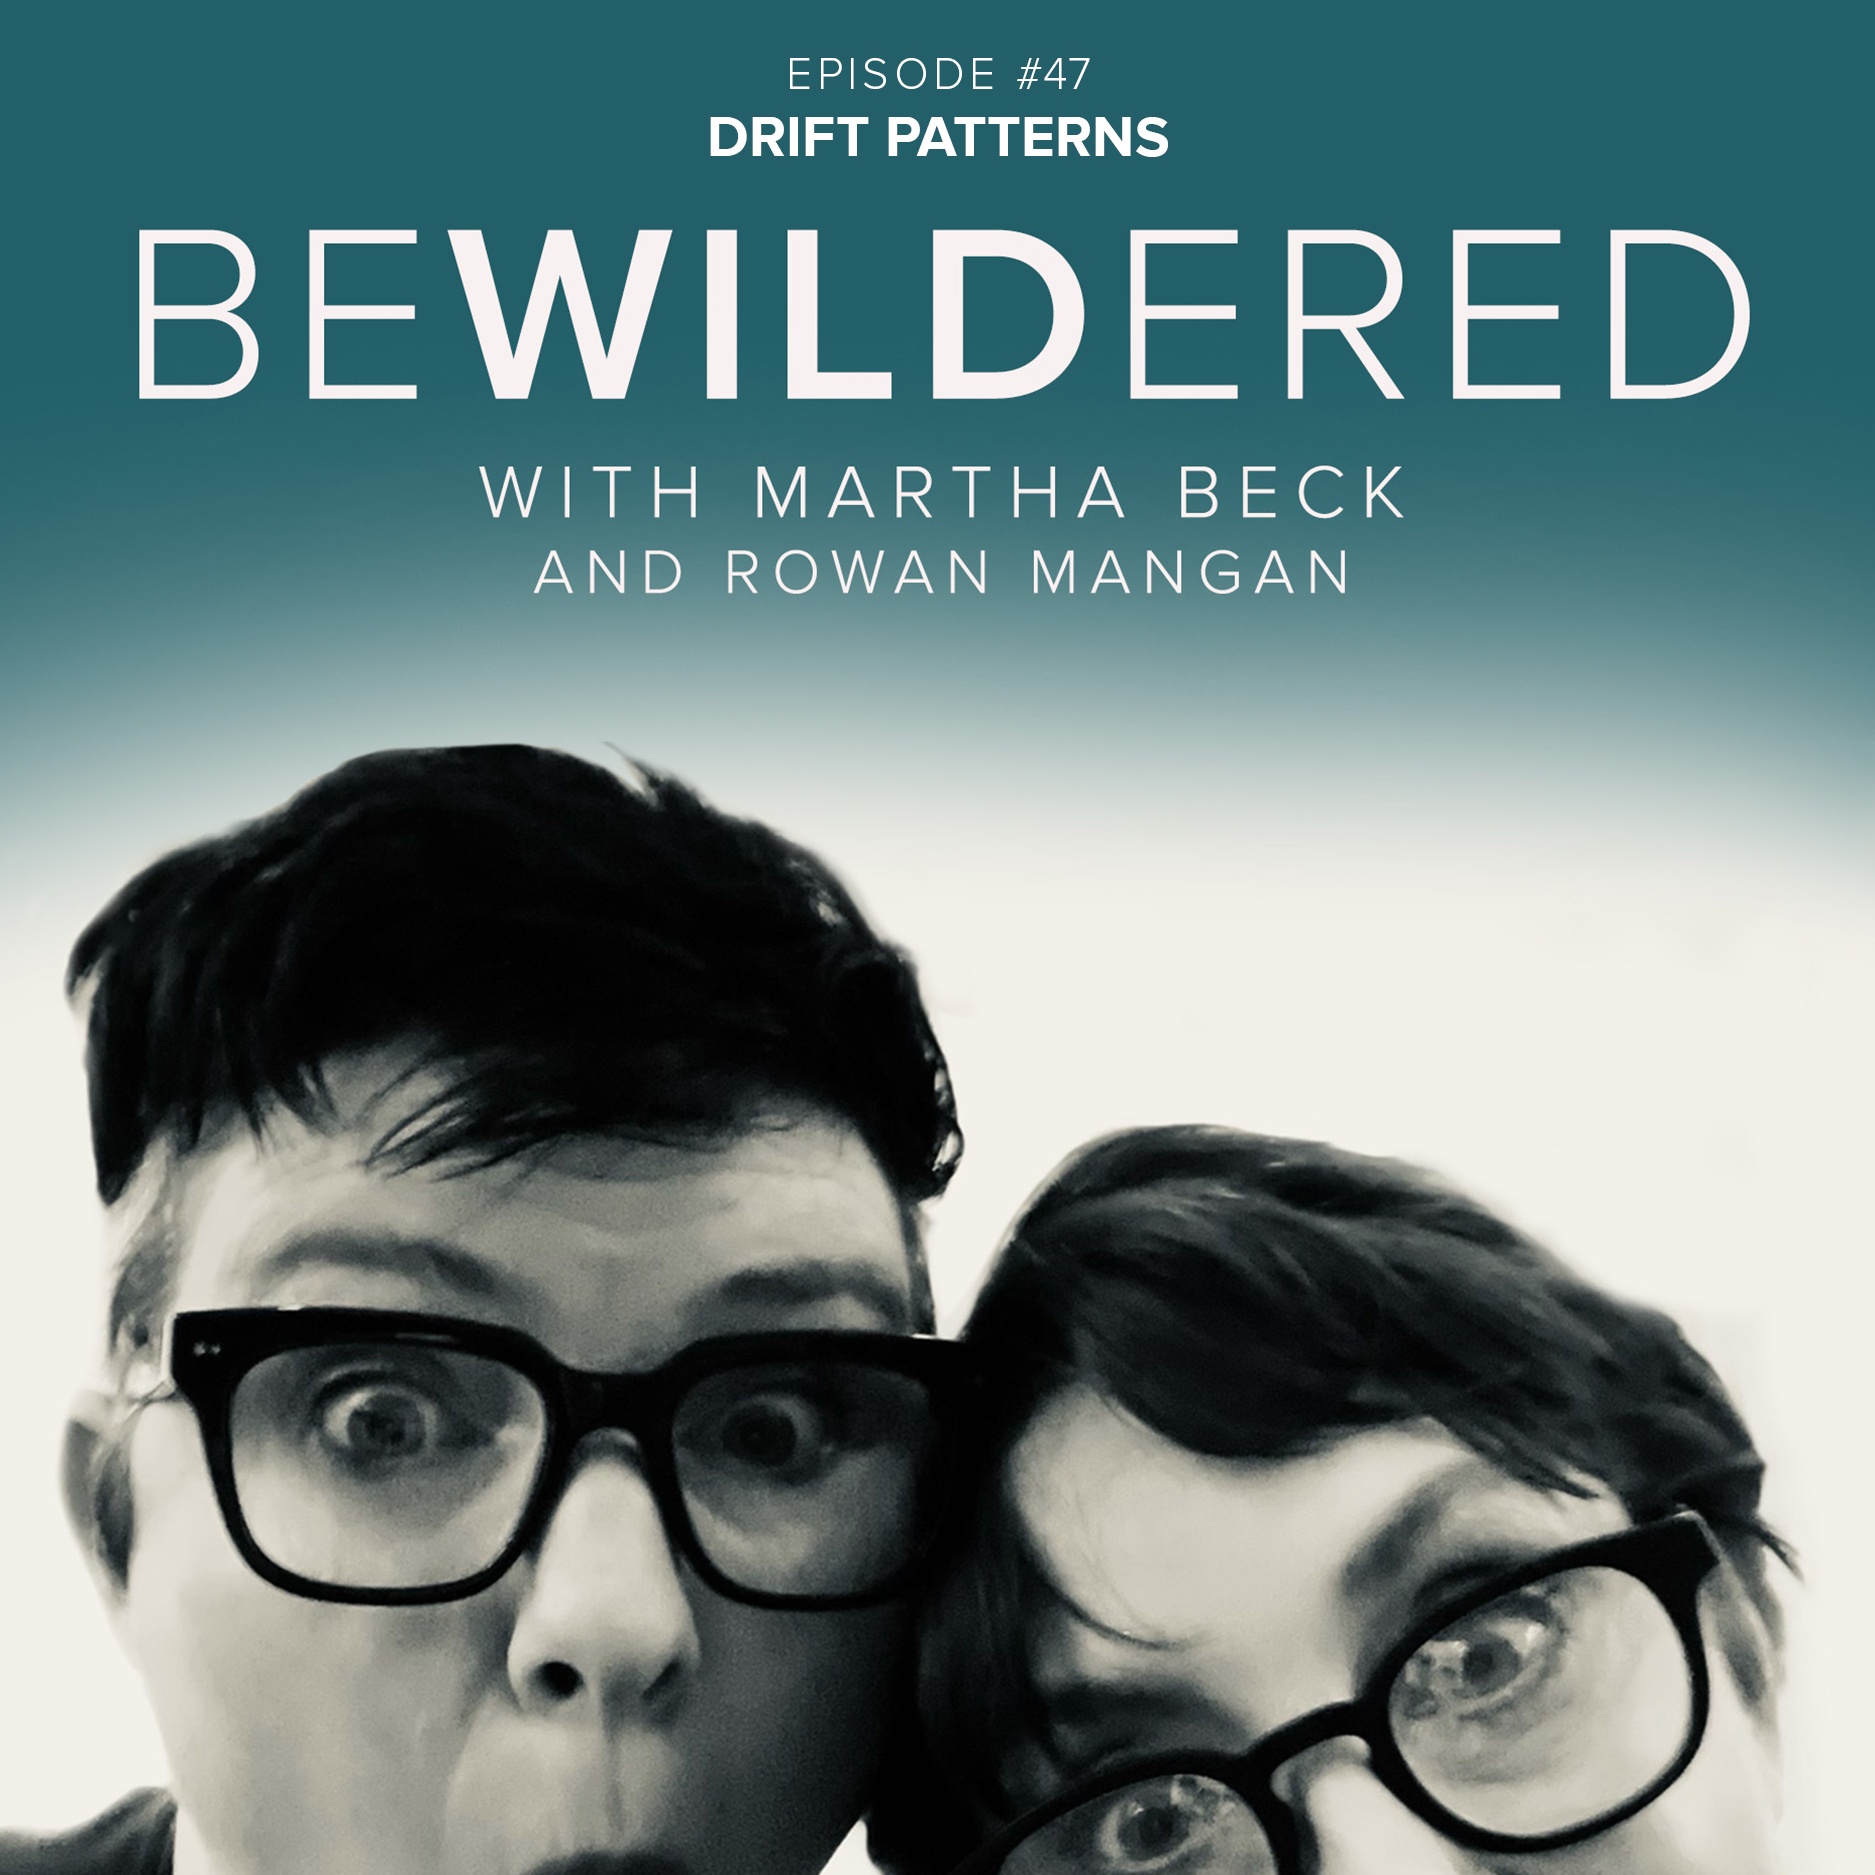 Image for Episode #47 Drift Patterns for the Bewildered Podcast with Martha Beck and Rowan Mangan